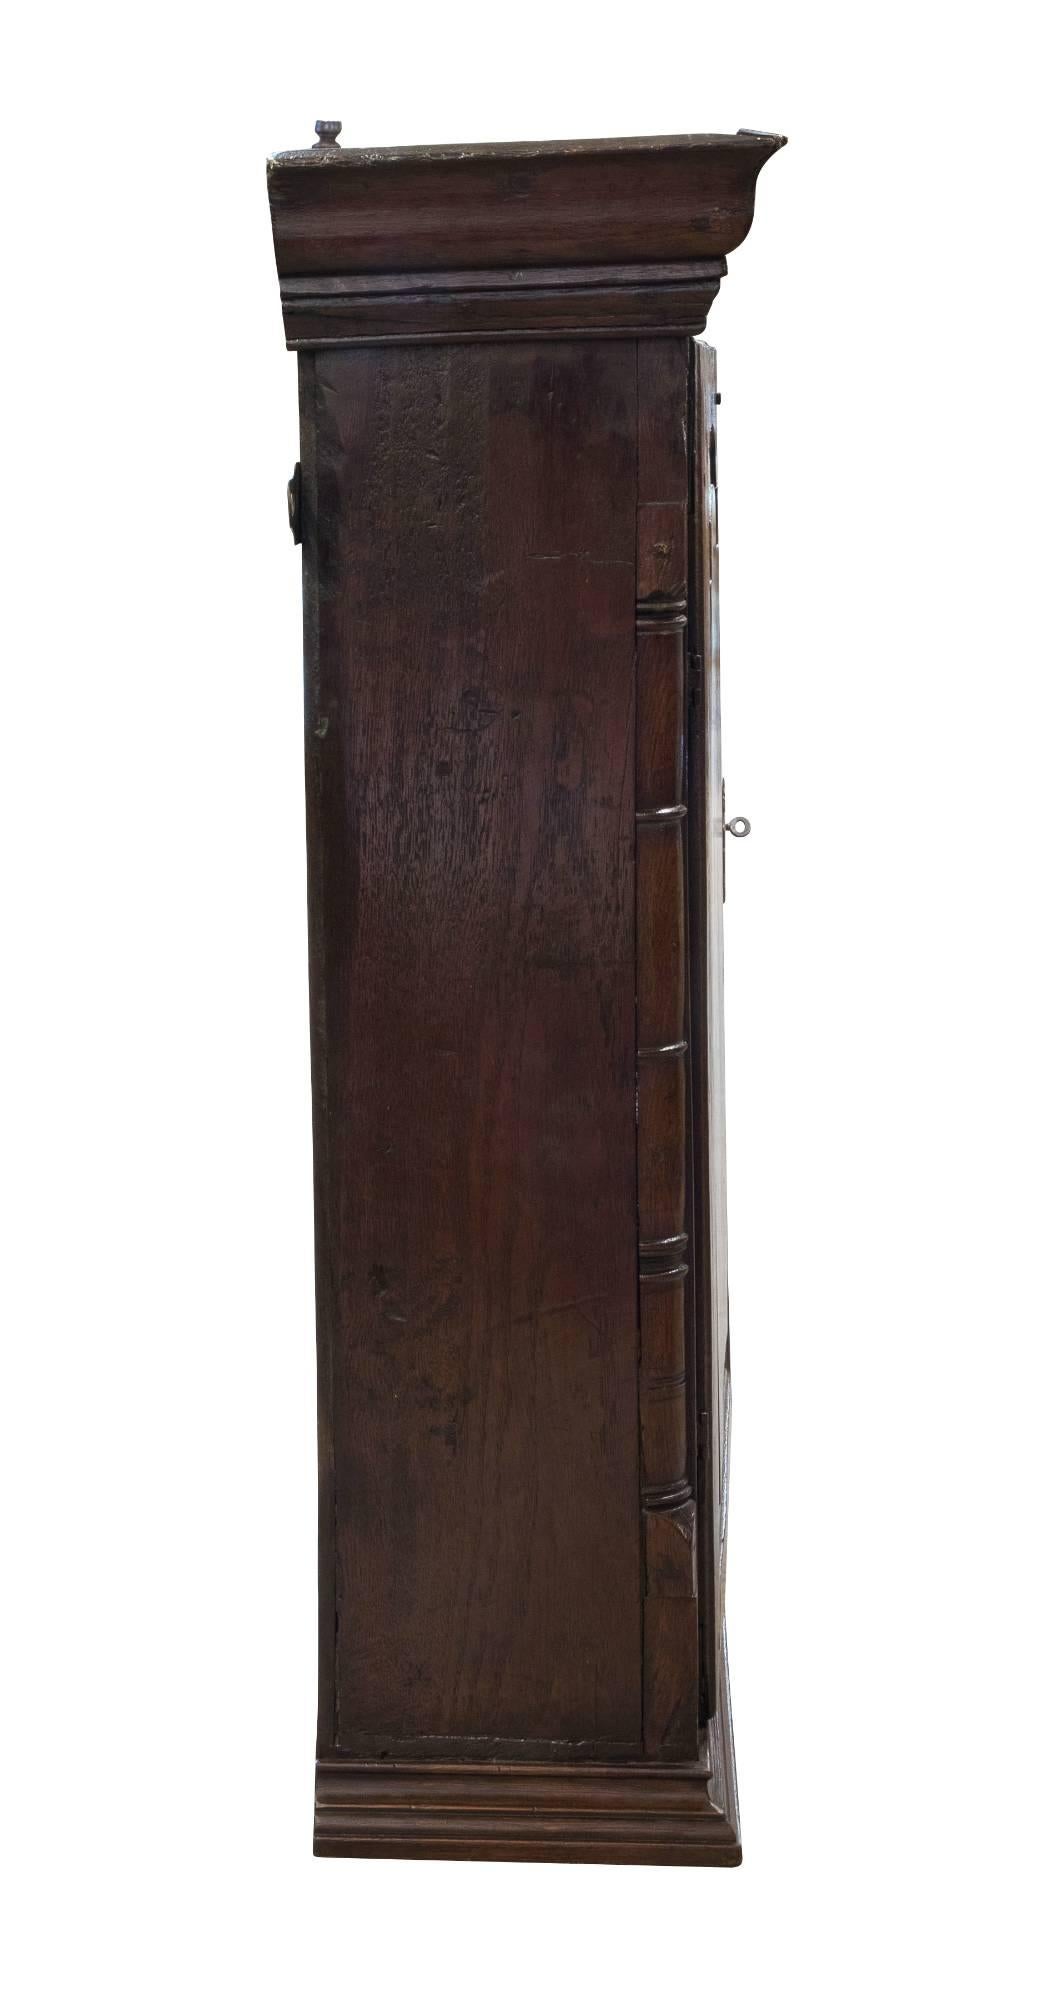 An 18th century Welsh oak hanging cupboard with 3 shelves to the interior and a single fielded panel door,


circa 1780.